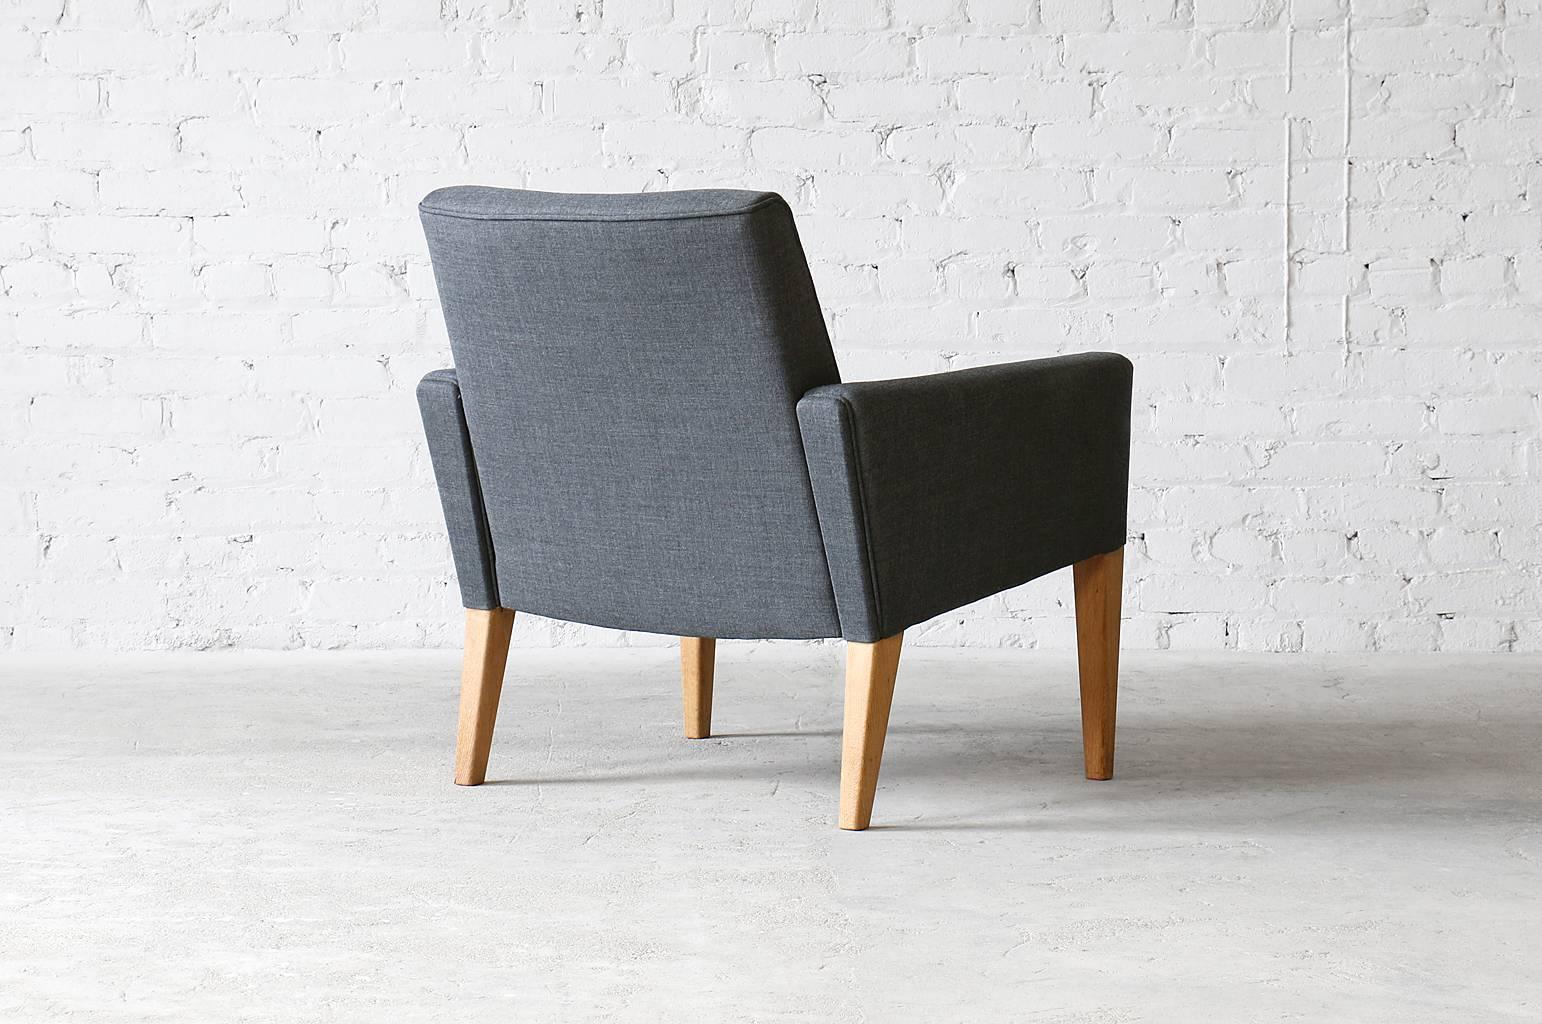 Model #AP31
Designed circa 1955
Solid white oak legs
Solid wood frame
Brand new Kvadrat Remix Danish wool fabric
Spring seat supports

Attractive vintage easy chair designed by Hans Wegner for Danish manufacturer AP Stolen. This chair